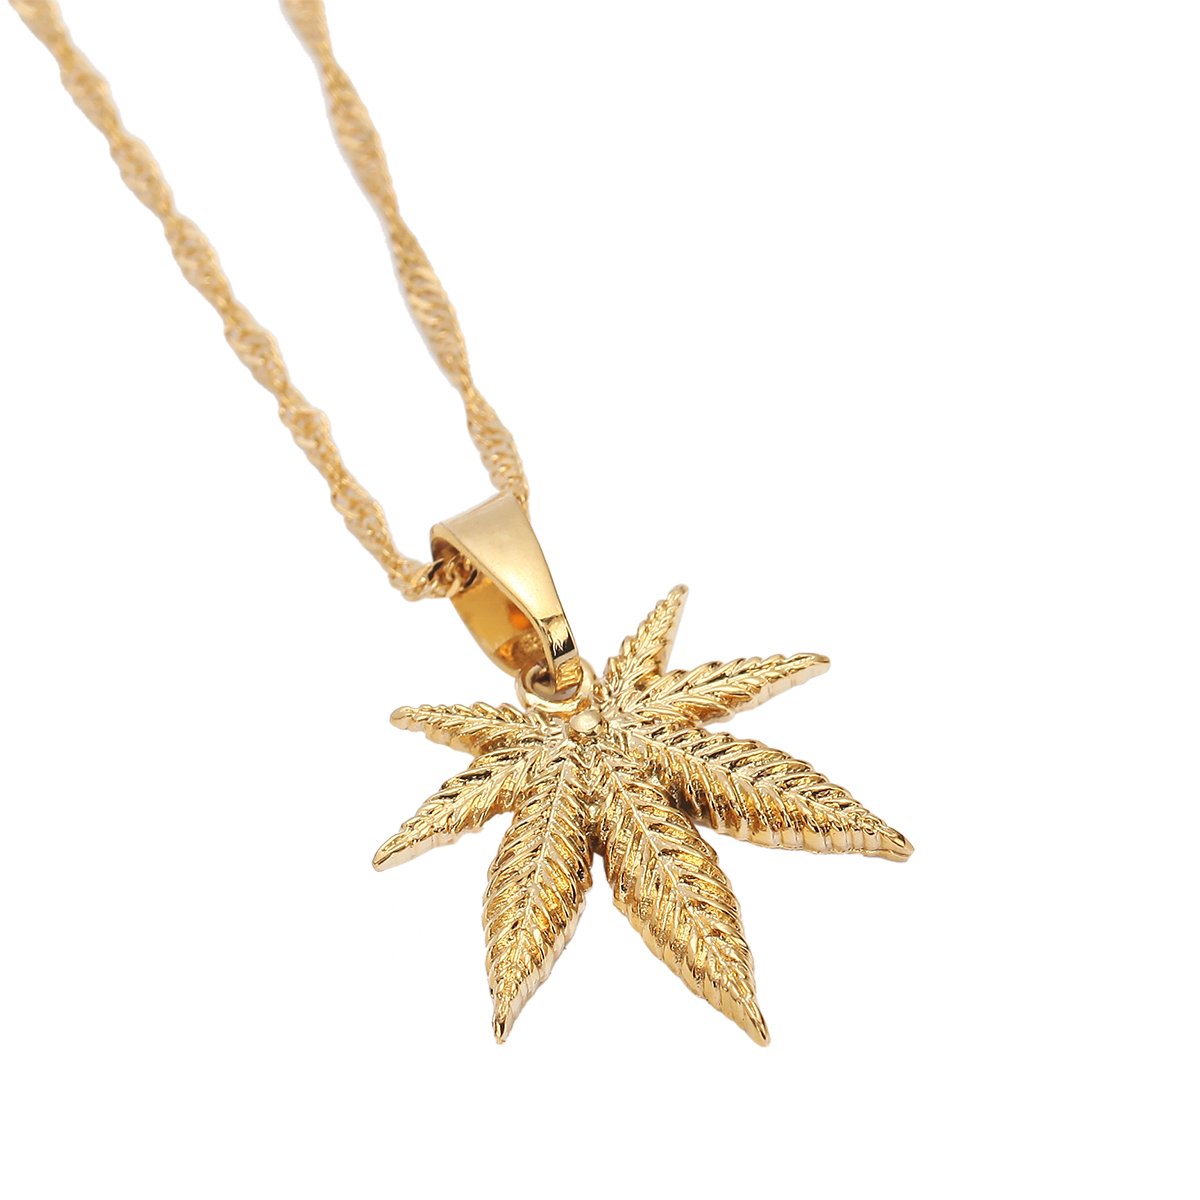 24K Yellow Gold Color Jewelry Cannabis Weed Marijuana Leaf Pendant Necklace